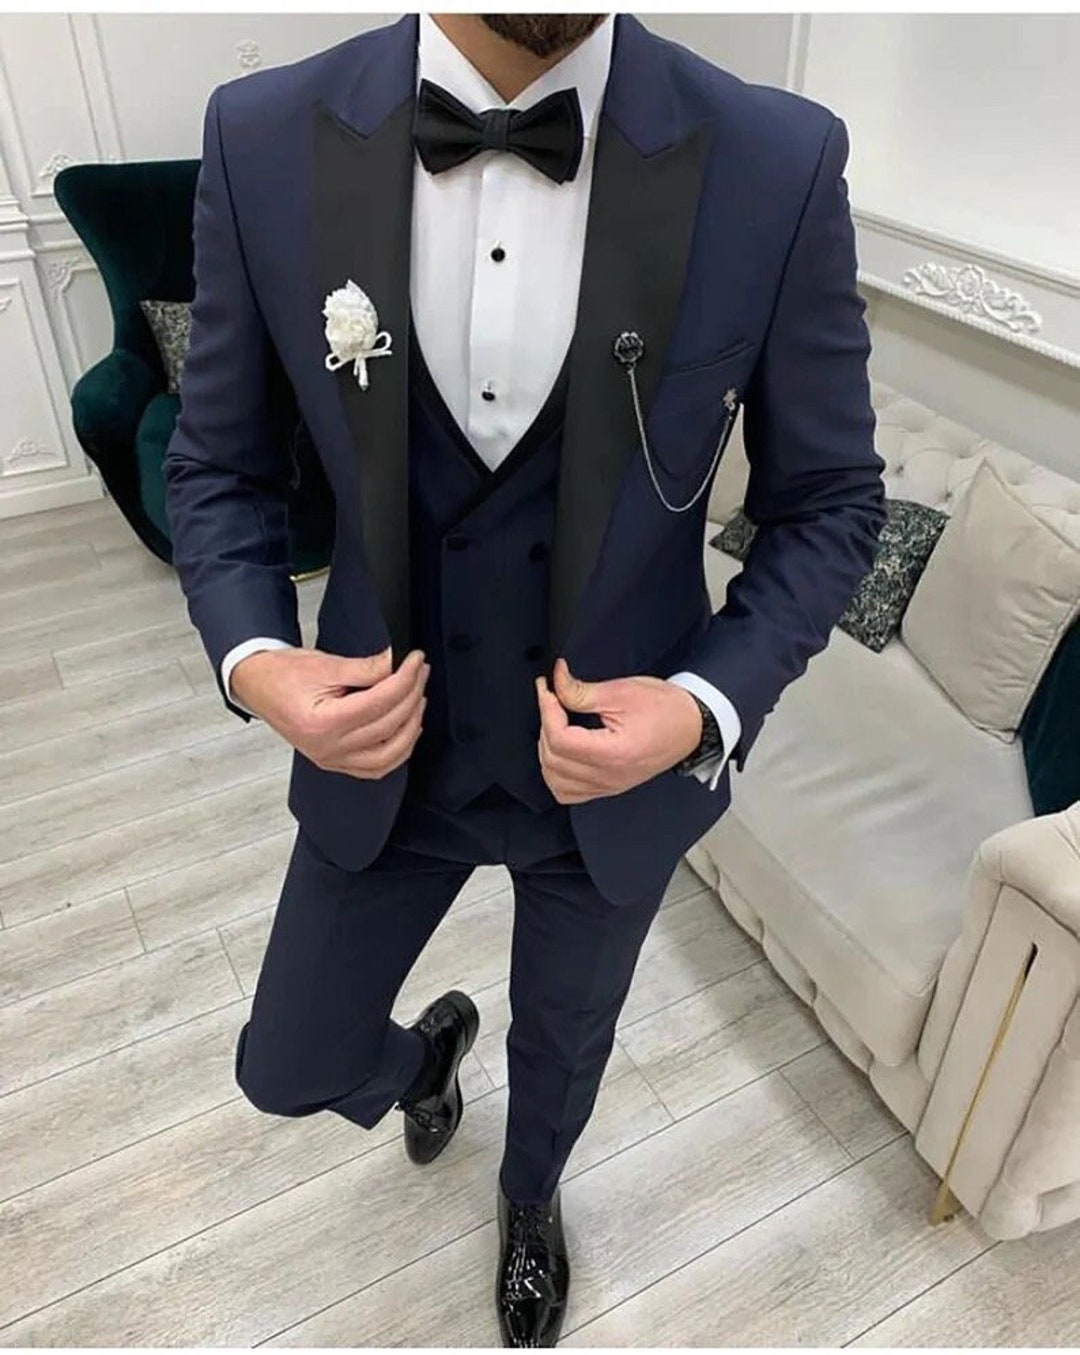 Suits for Men Navy Blue Three Piece Wedding Suit Formal - Etsy